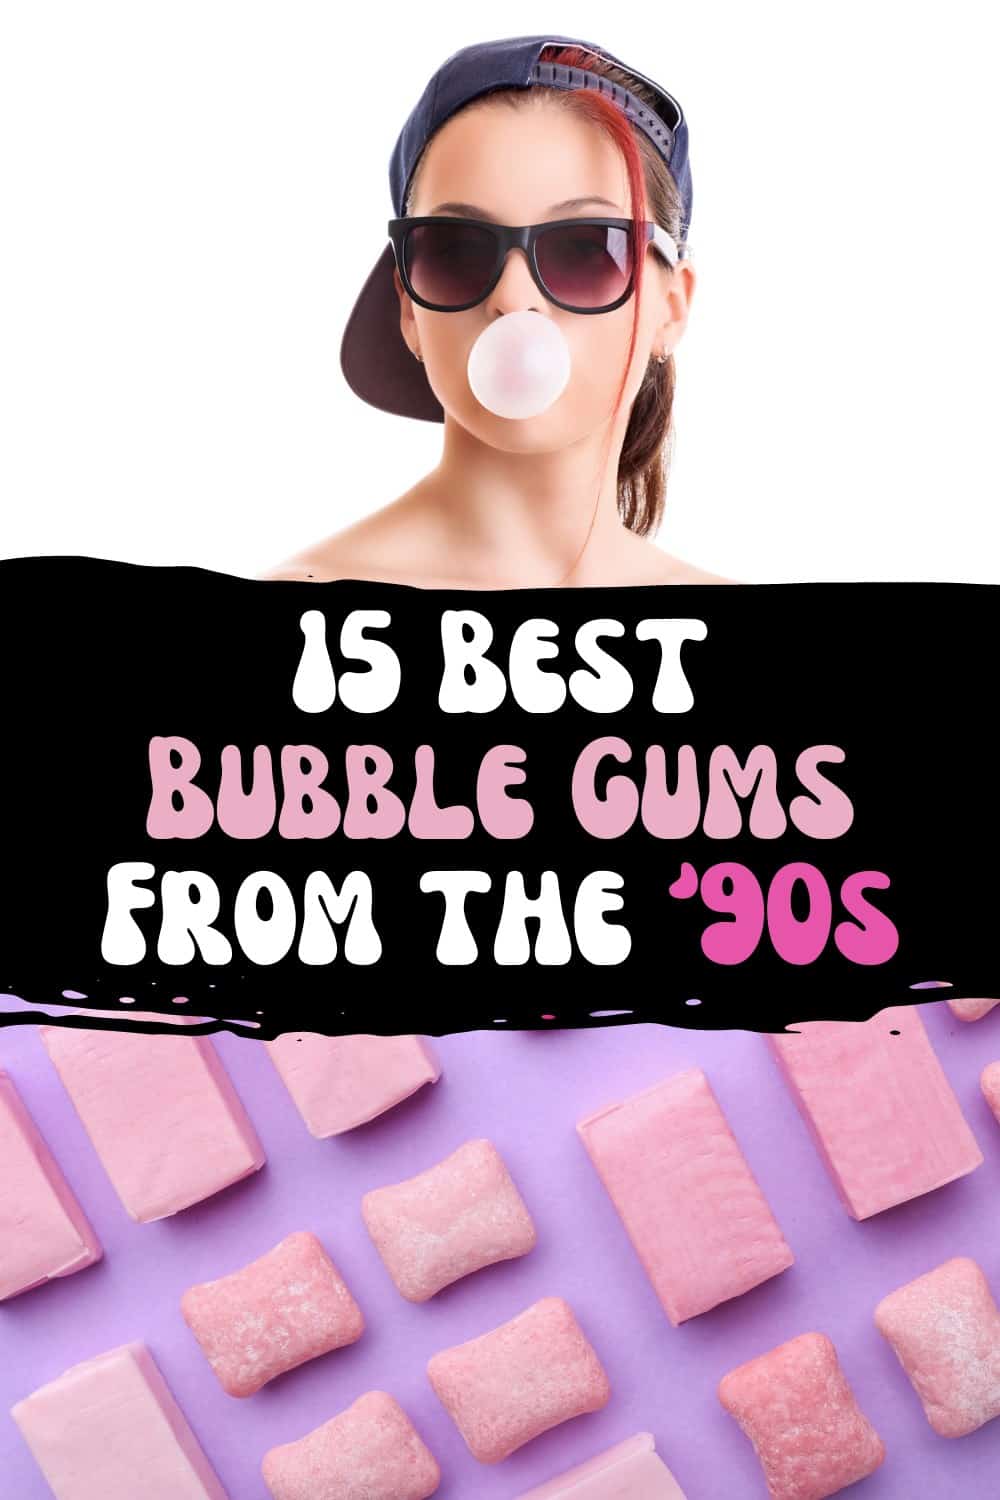 What was the Best Bubble Gums of the 90s?